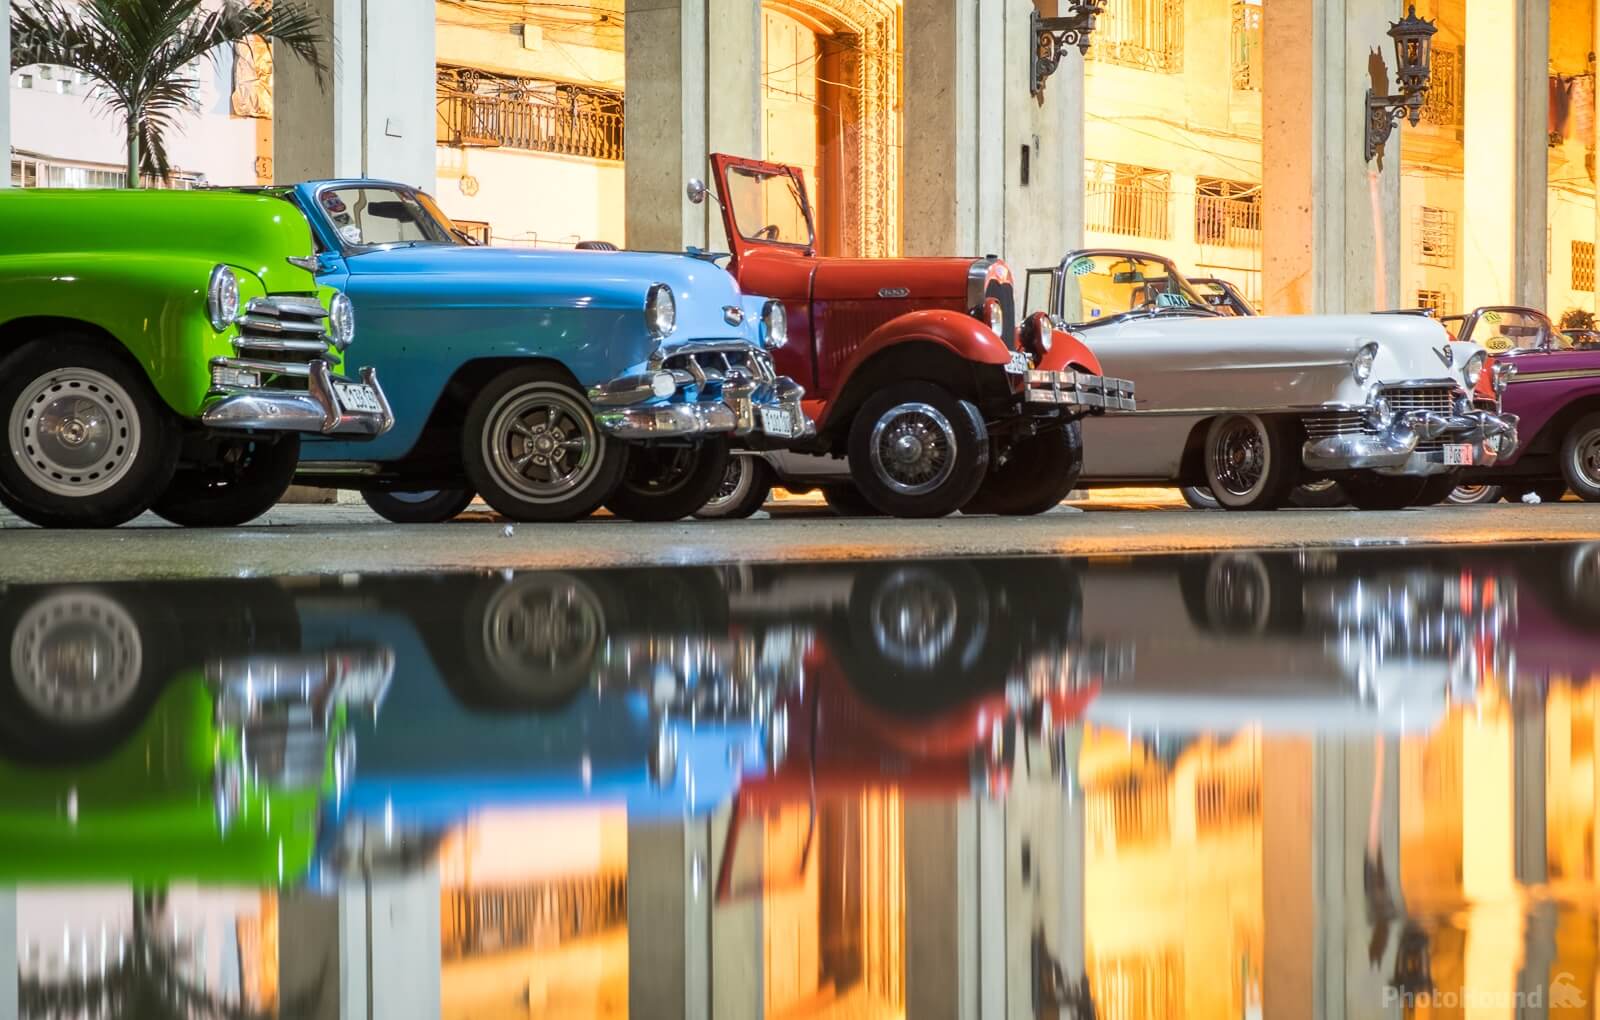 Image of Old cars by James Lawrence